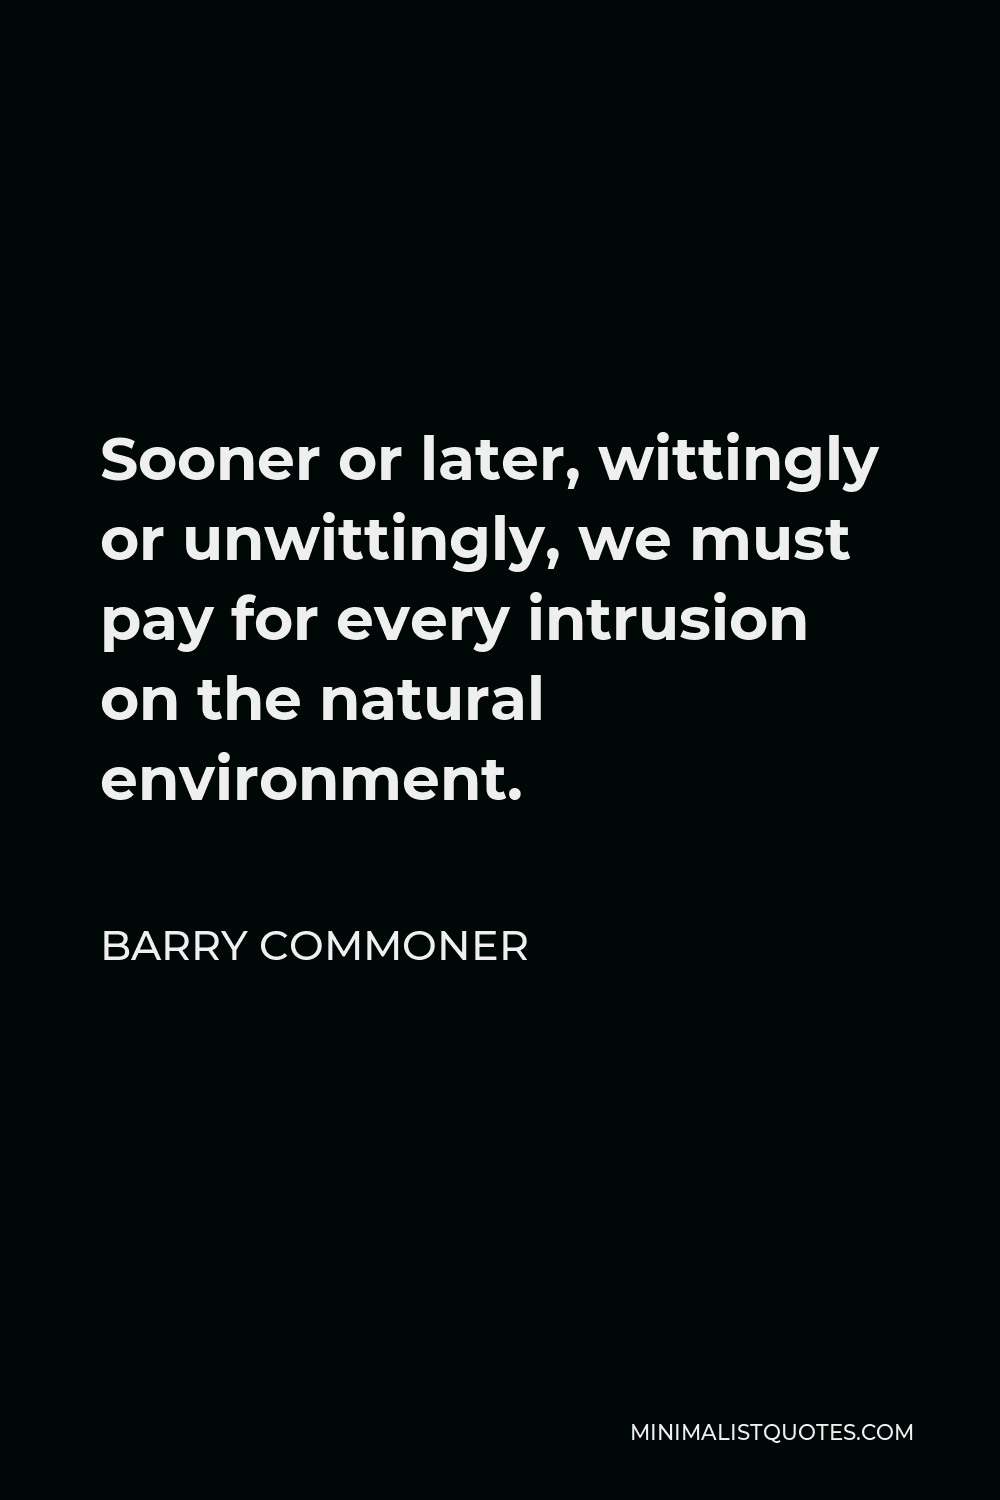 Barry Commoner Quote - Sooner or later, wittingly or unwittingly, we must pay for every intrusion on the natural environment.